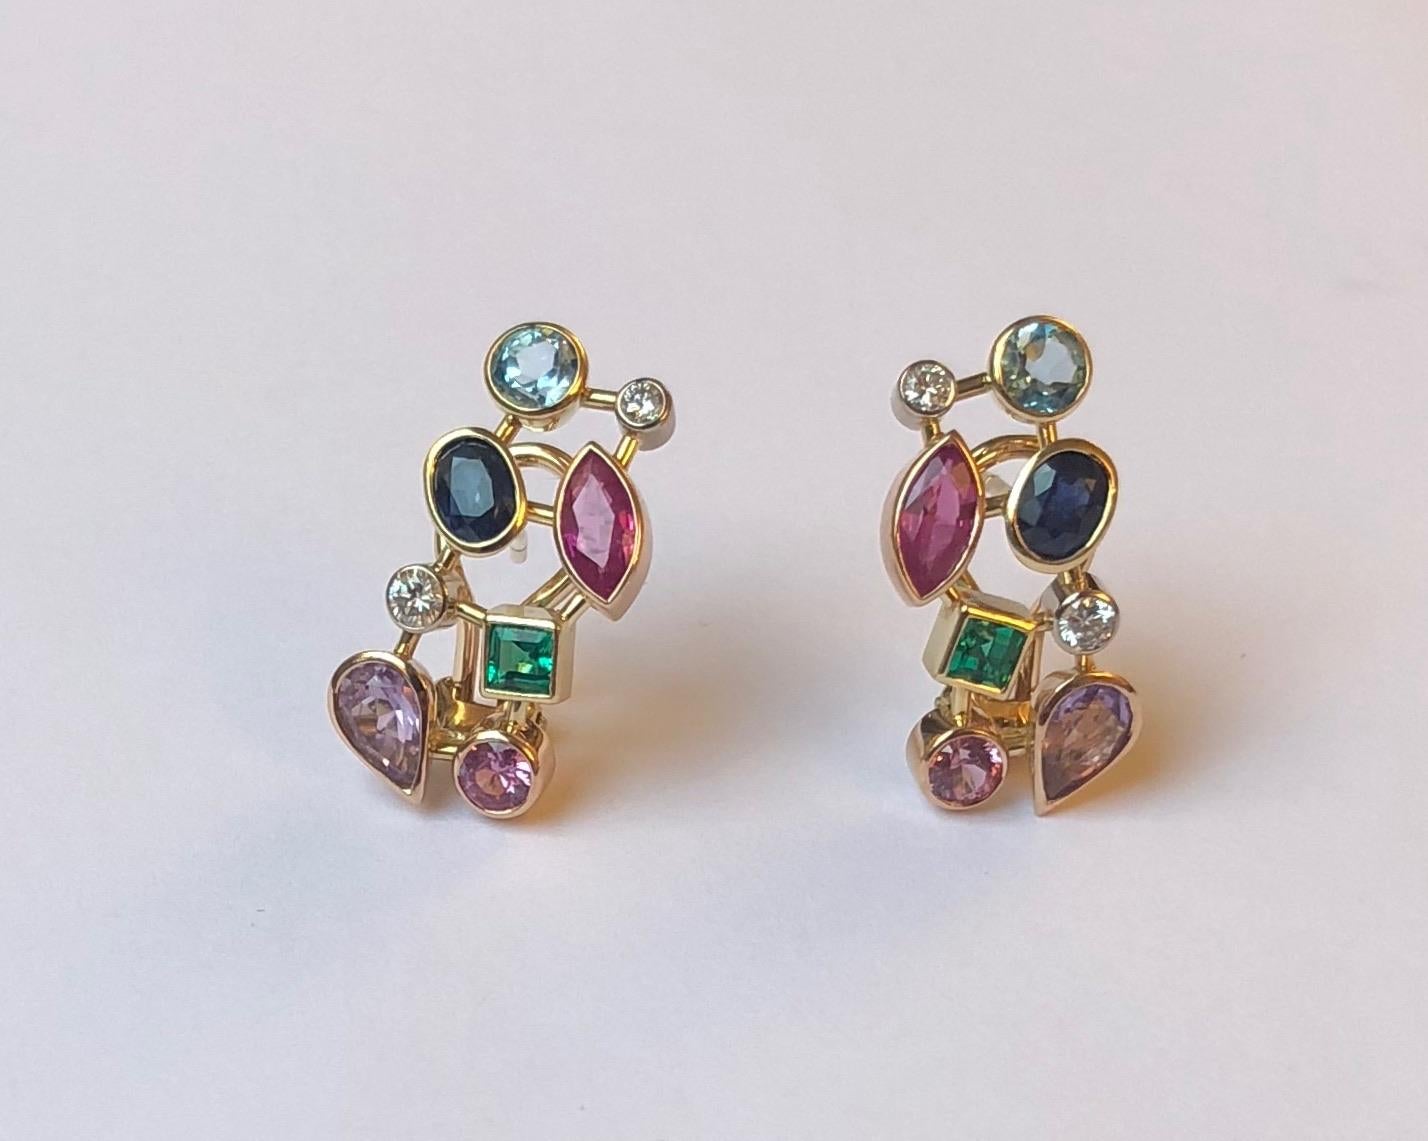 This stunning pair of earrings features several gemstones, such as topaz, emerald, diamond and amethyst. Each stone is set in white, yellow or rose 18kt gold, depending on the color as to best accentuate it.

This pendant was designed and made by